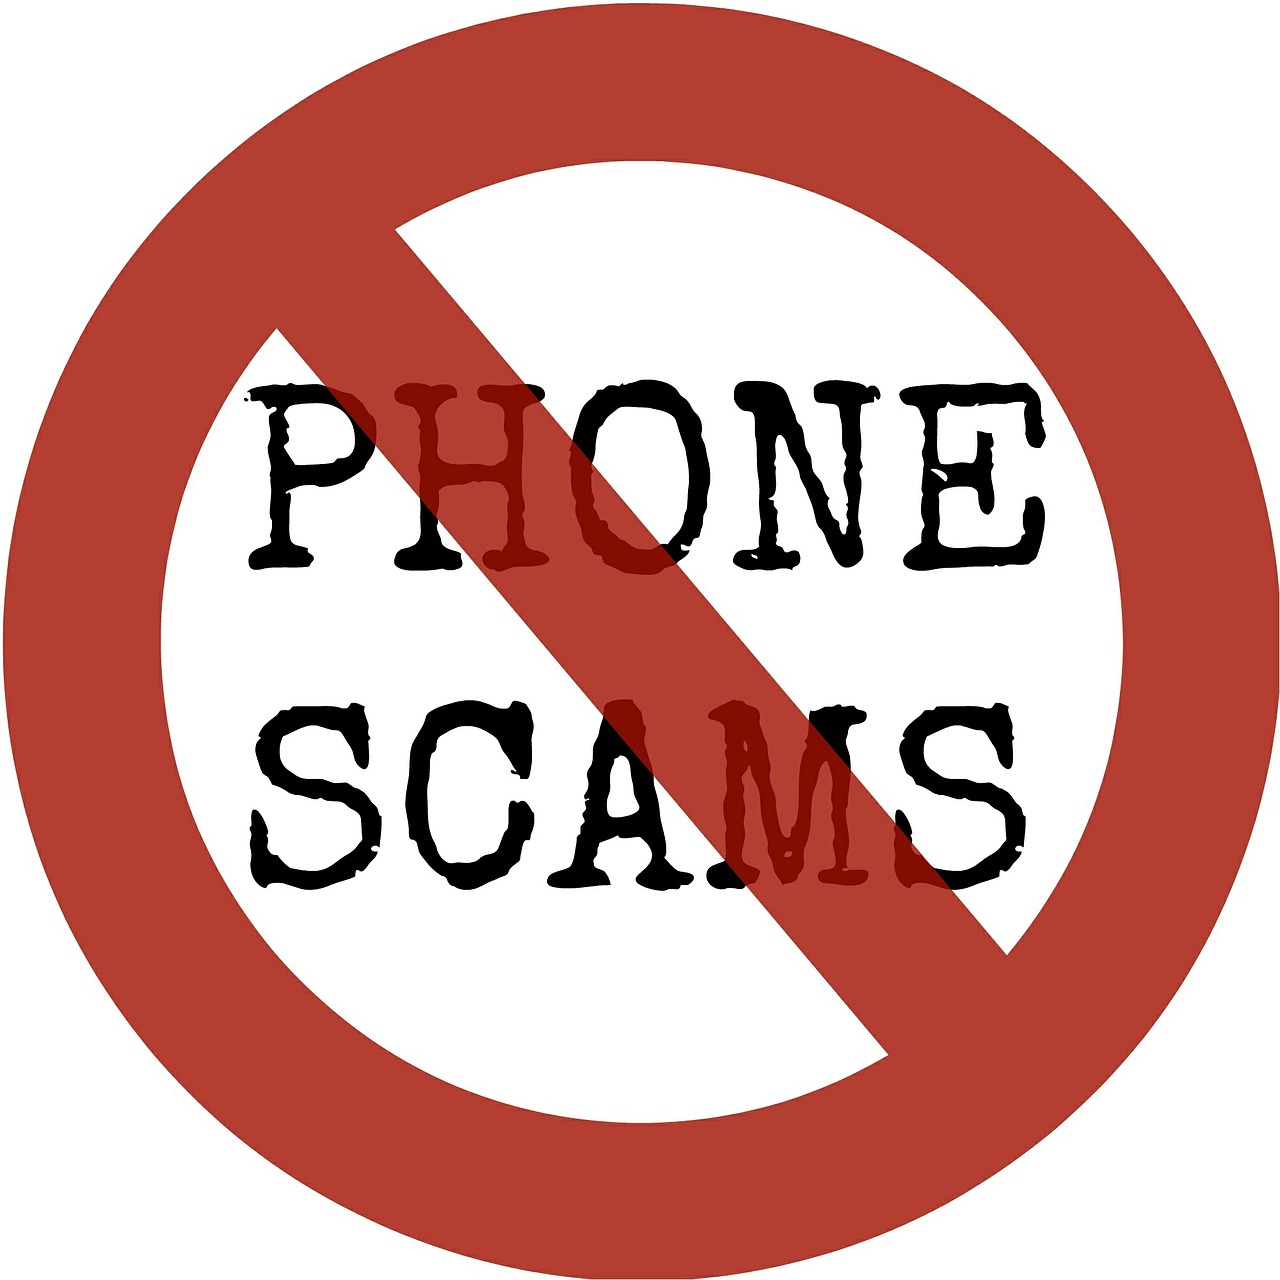 Icon with phone scam surounded by a read circle and slas